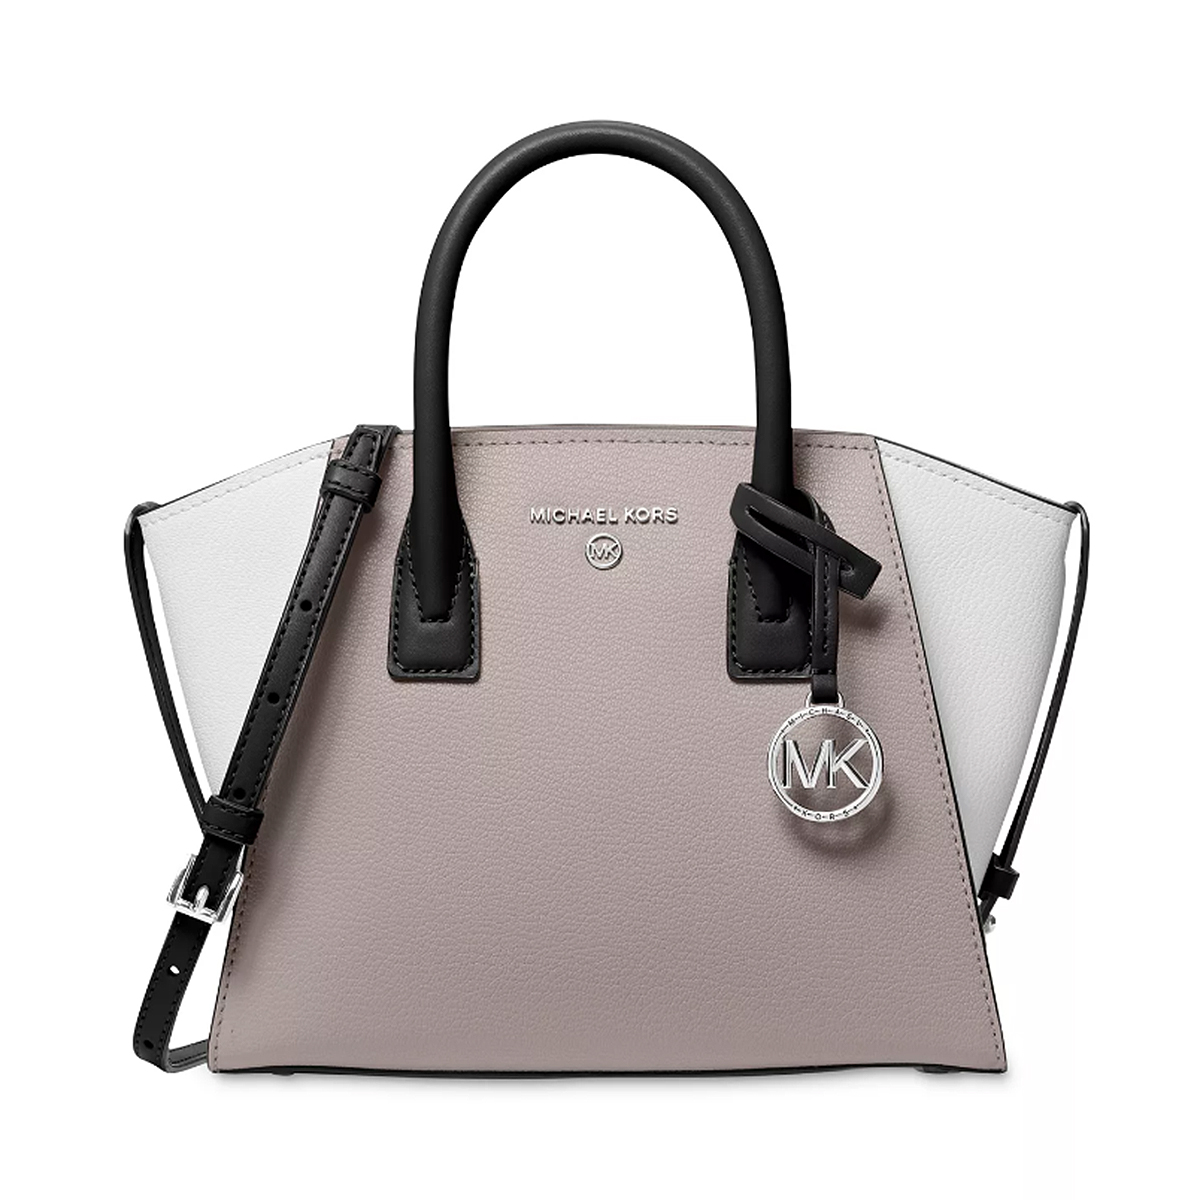 Michael Kors: Save up to 25% on full price items